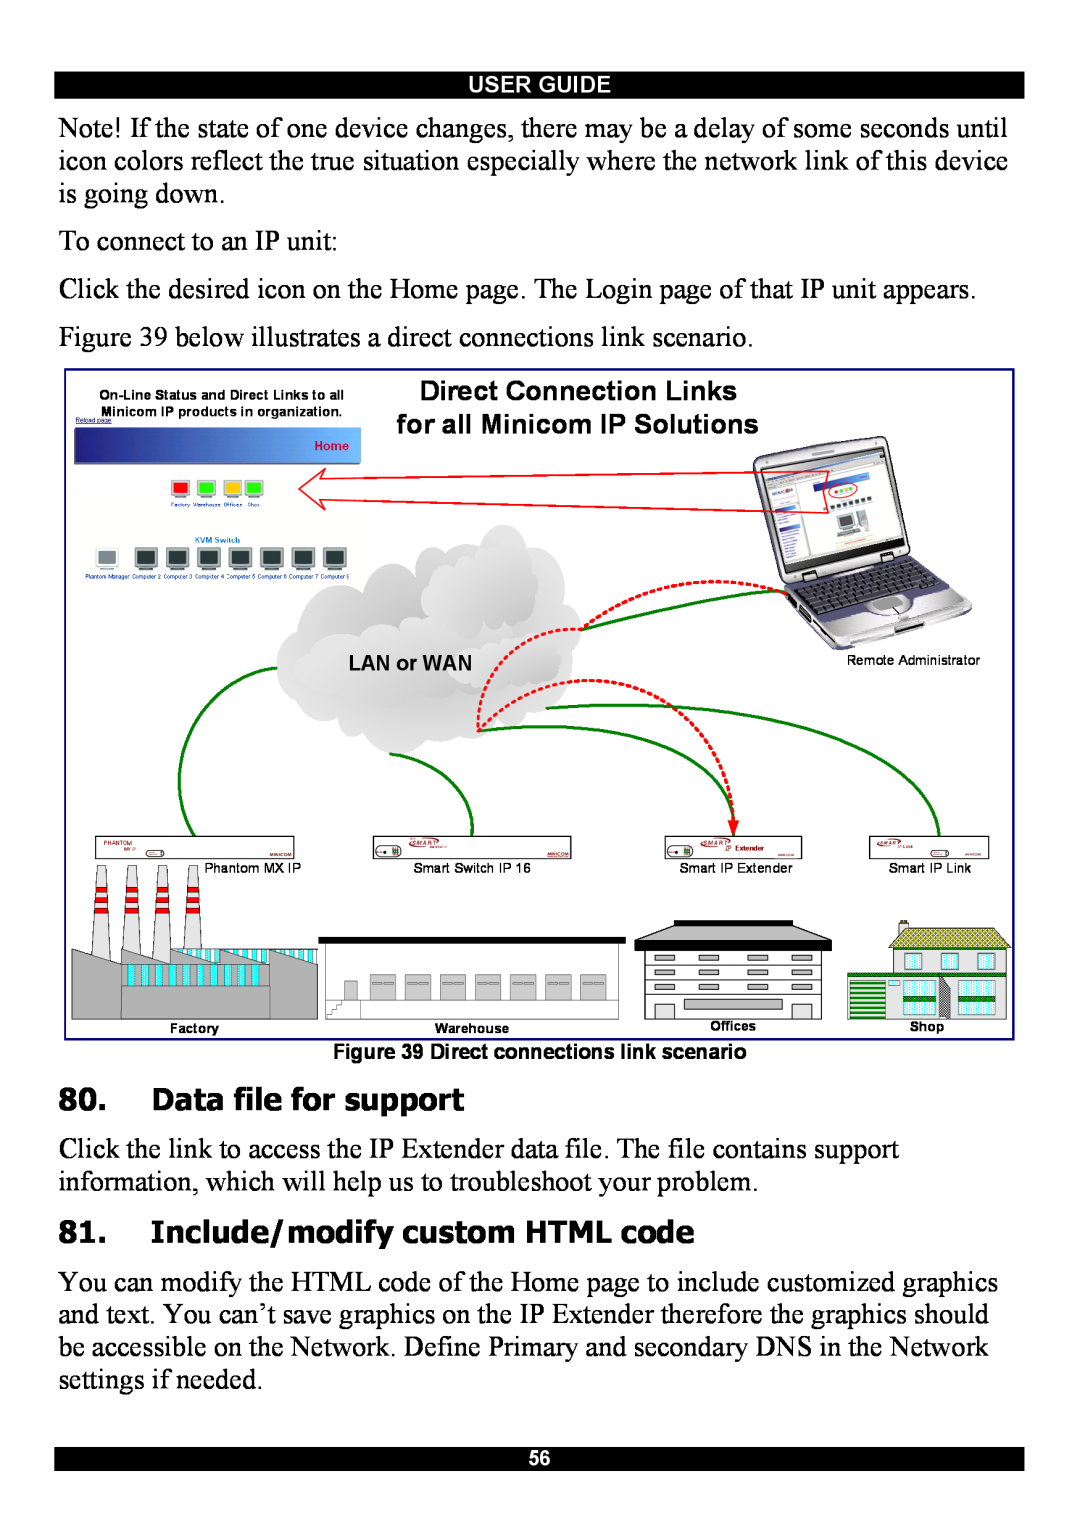 Minicom Advanced Systems Smart IP Extender manual Data file for support, Include/modify custom HTML code 